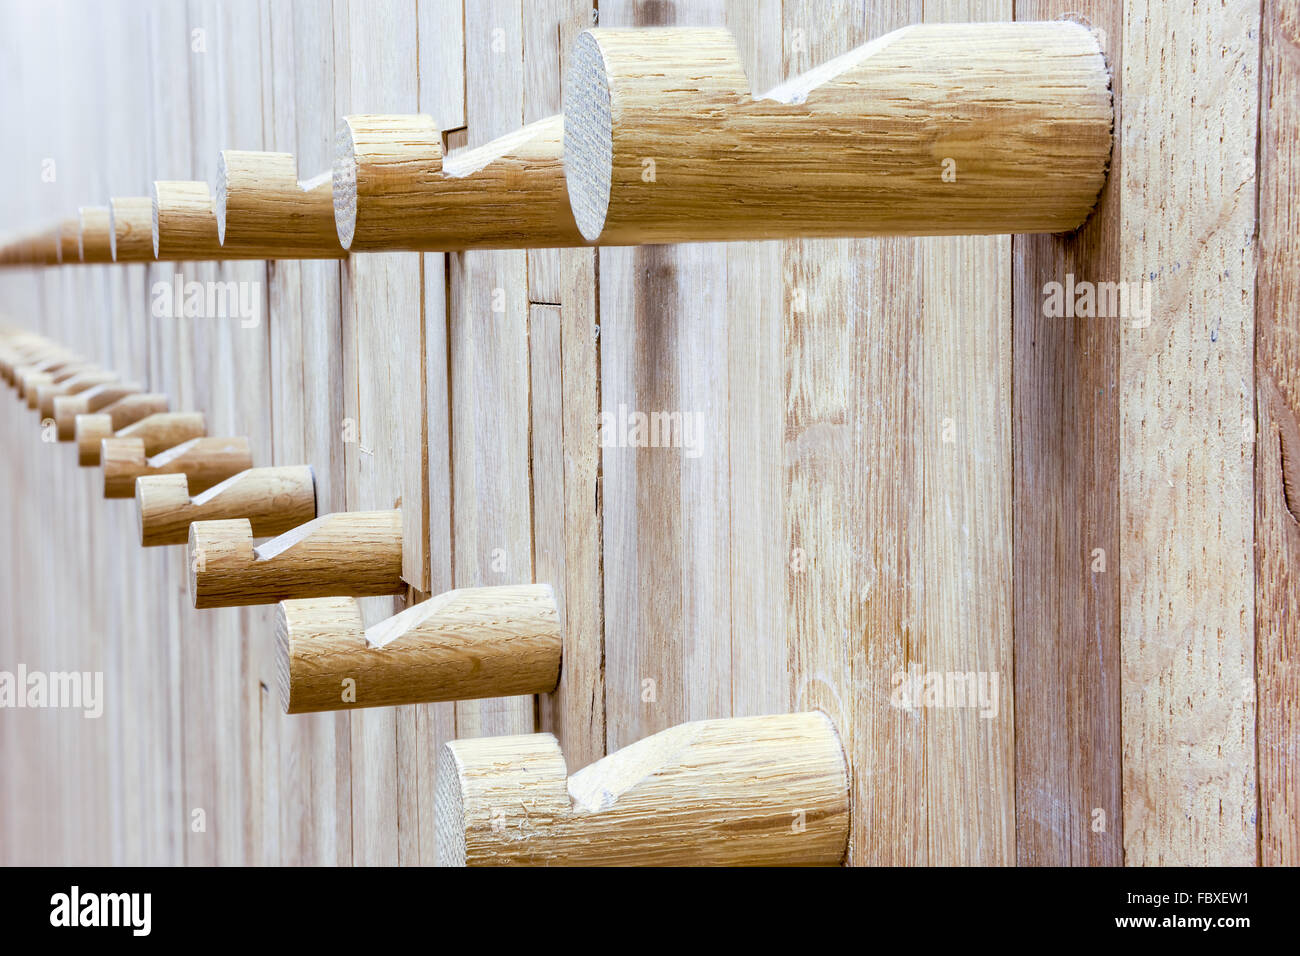 an wall from wood whit some coat rack in wood Stock Photo